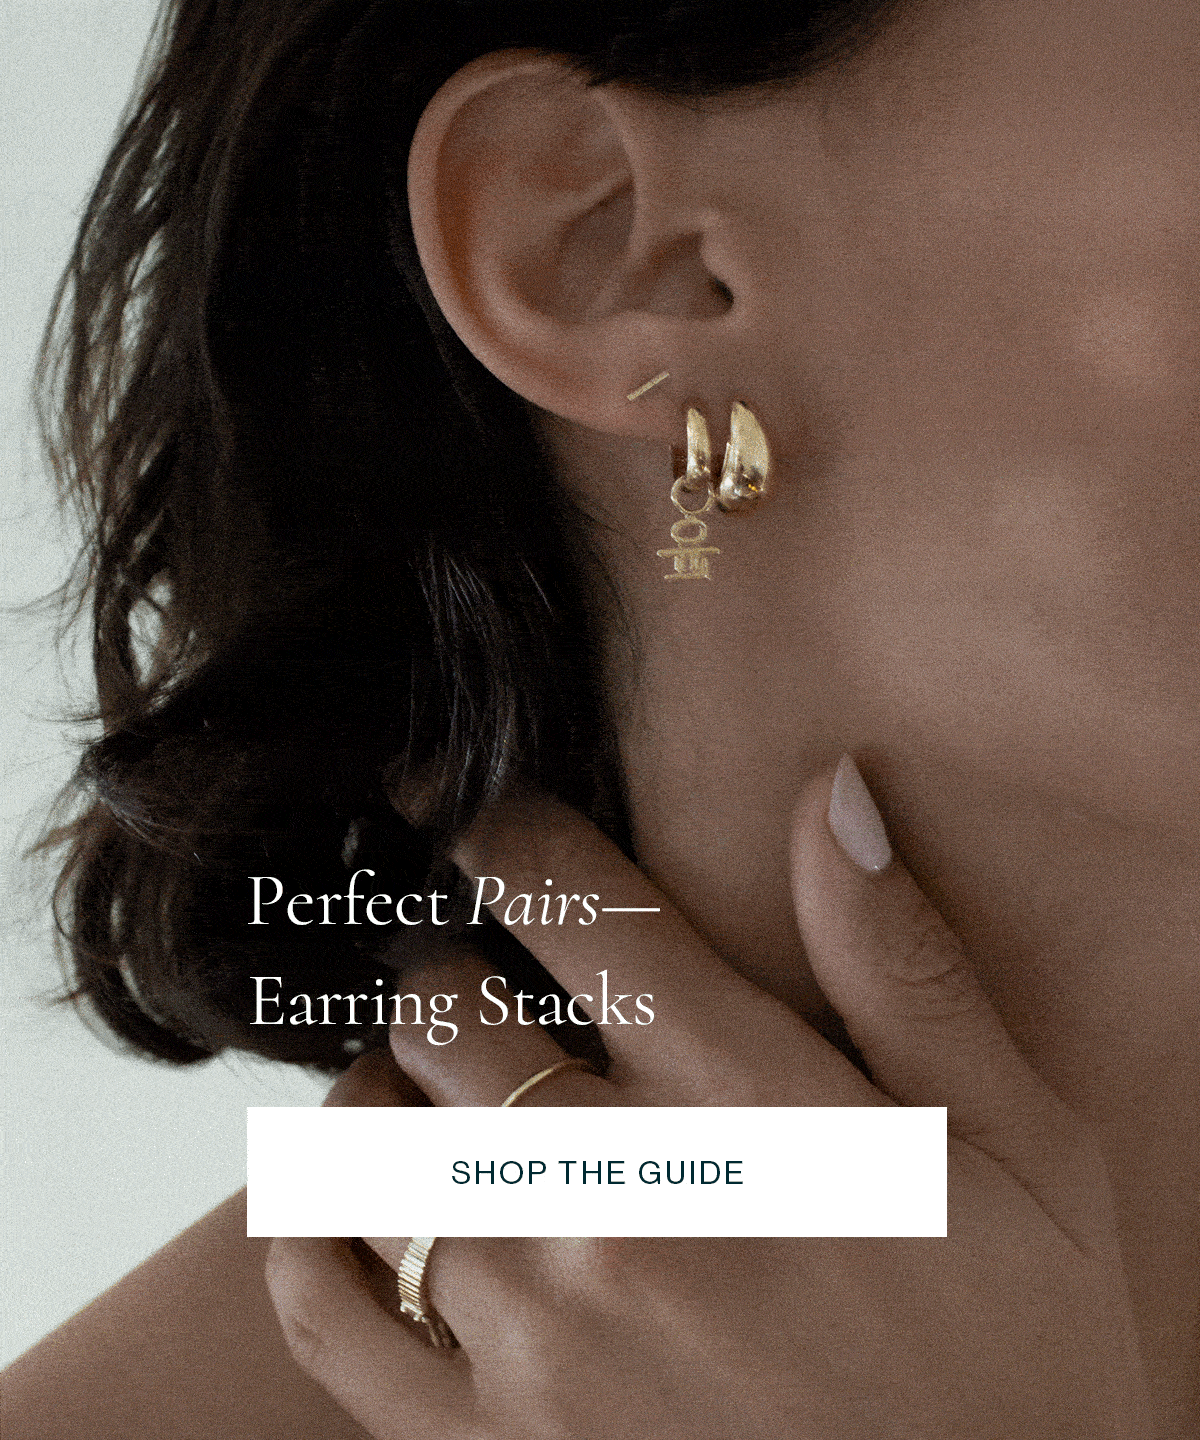 Shop The Guide—Earring Stacks